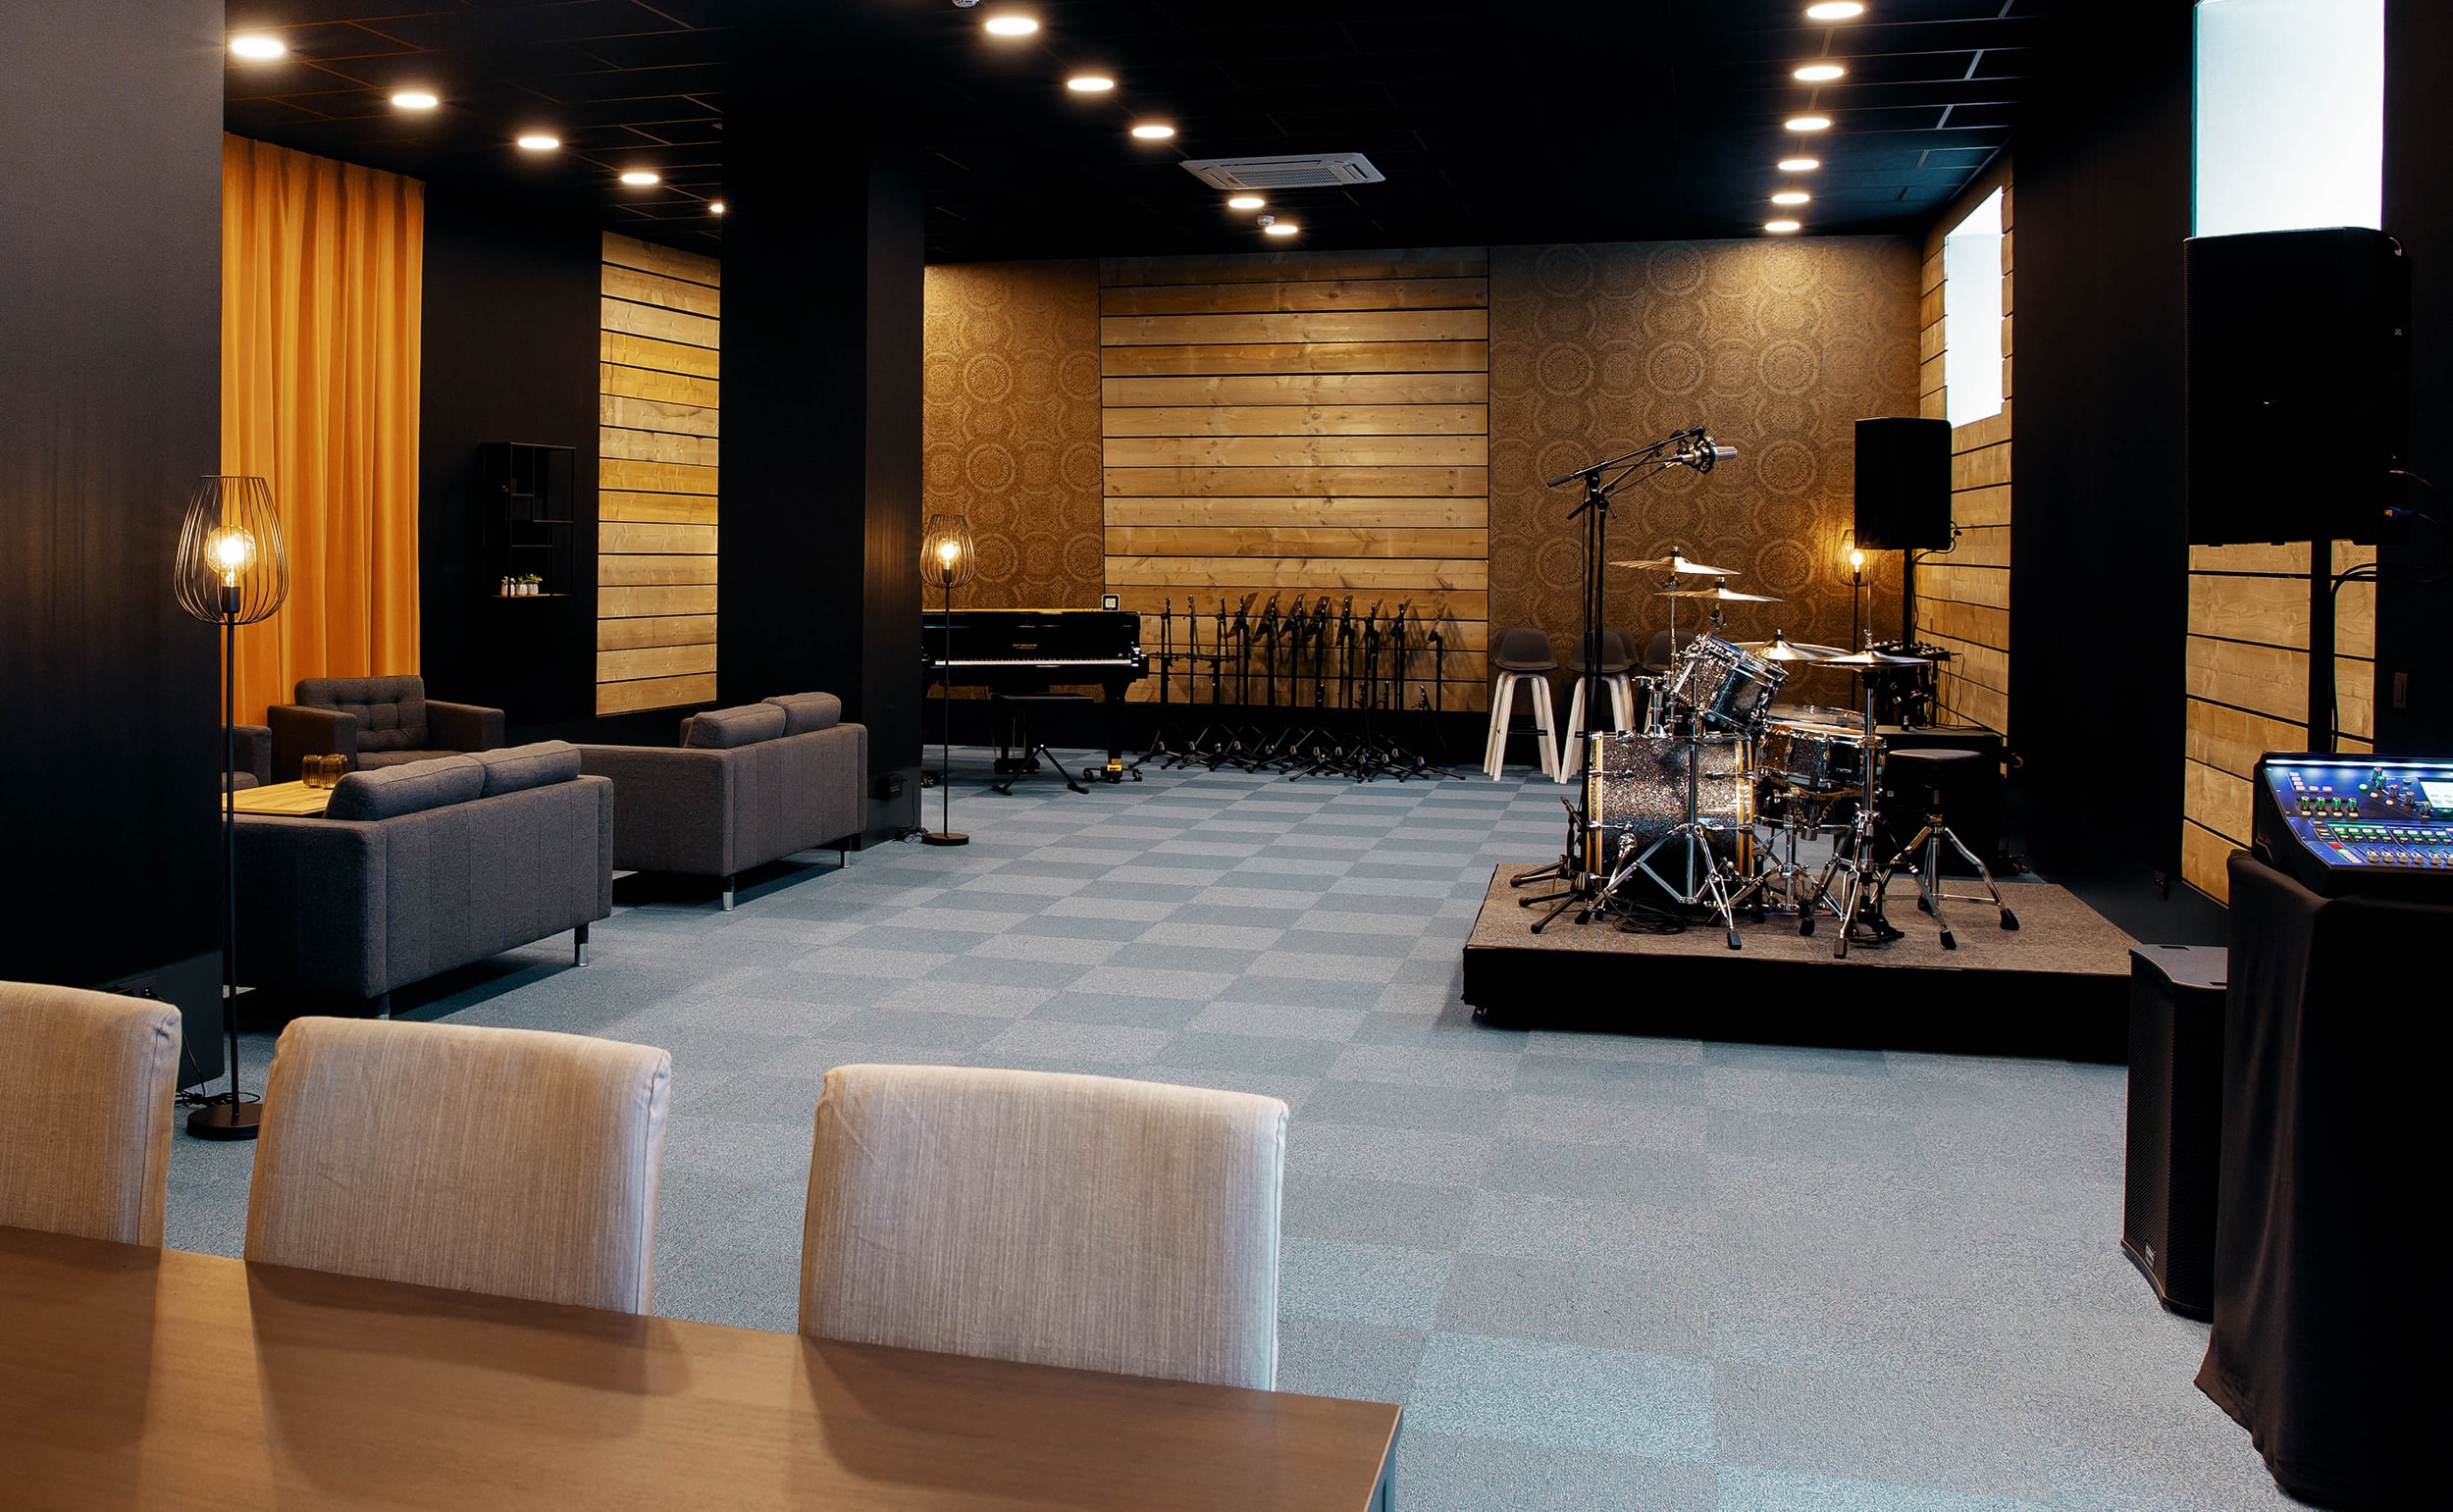 Allen & Heath Is The Primary Choice For Brand New High-End Rehearsal Studios Near Brussels | XLR